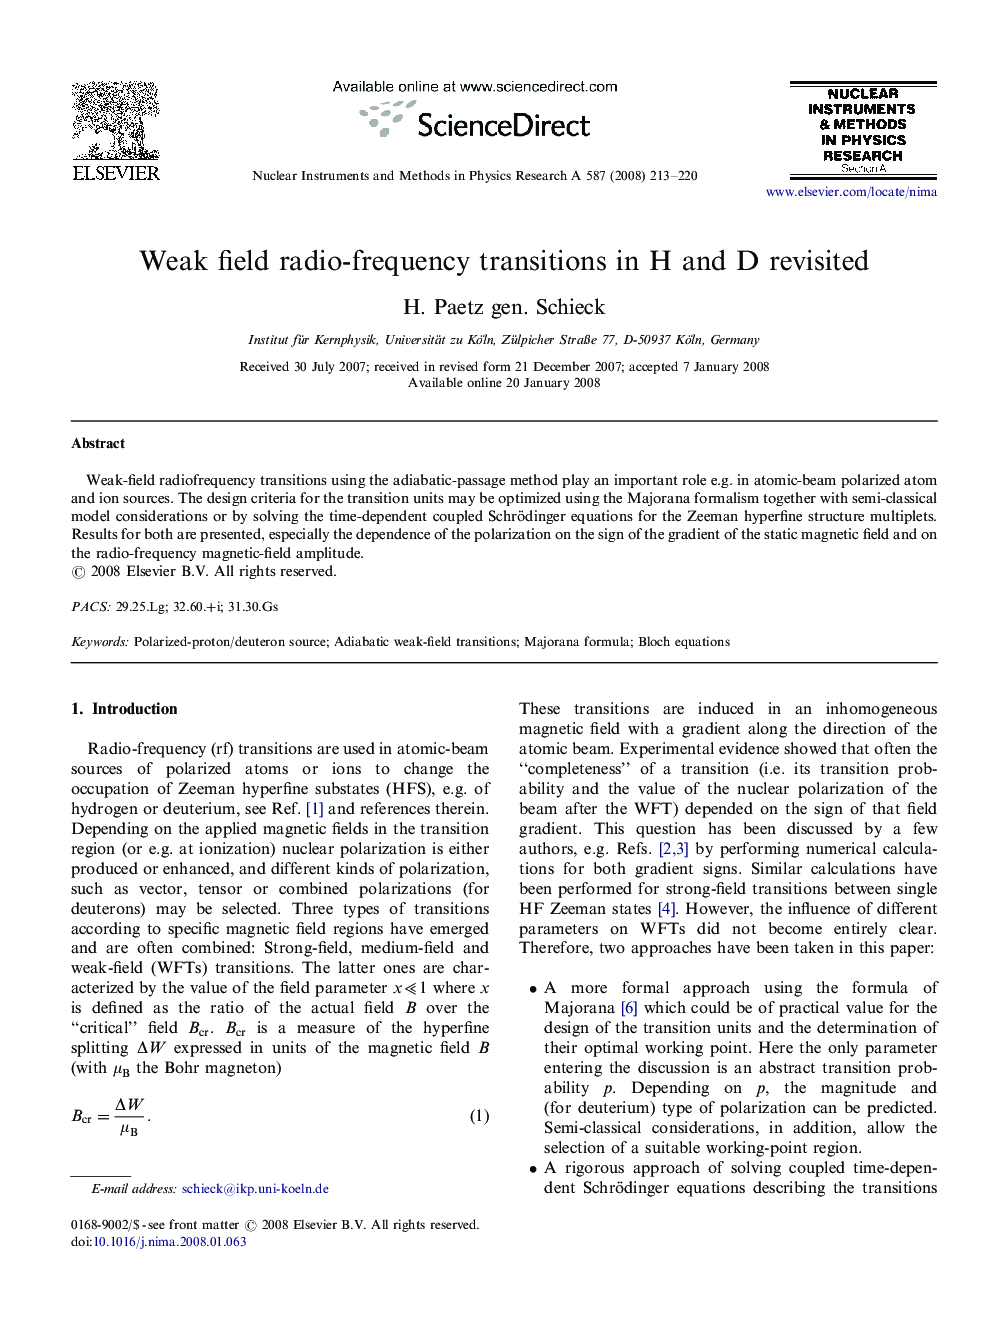 Weak field radio-frequency transitions in H and D revisited